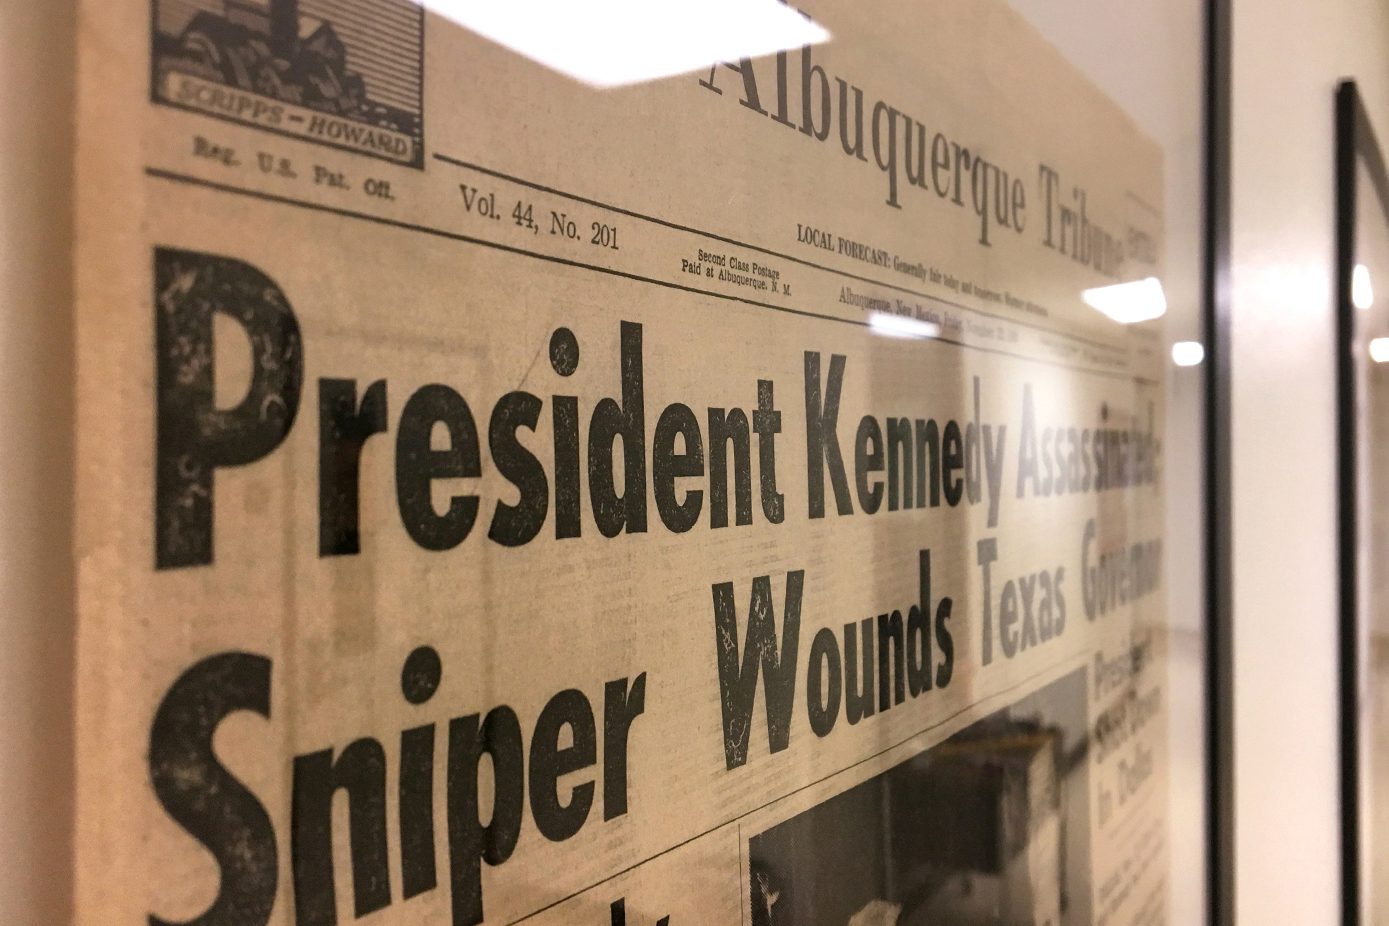 Photo of newspaper page front that shows Kennedy headline